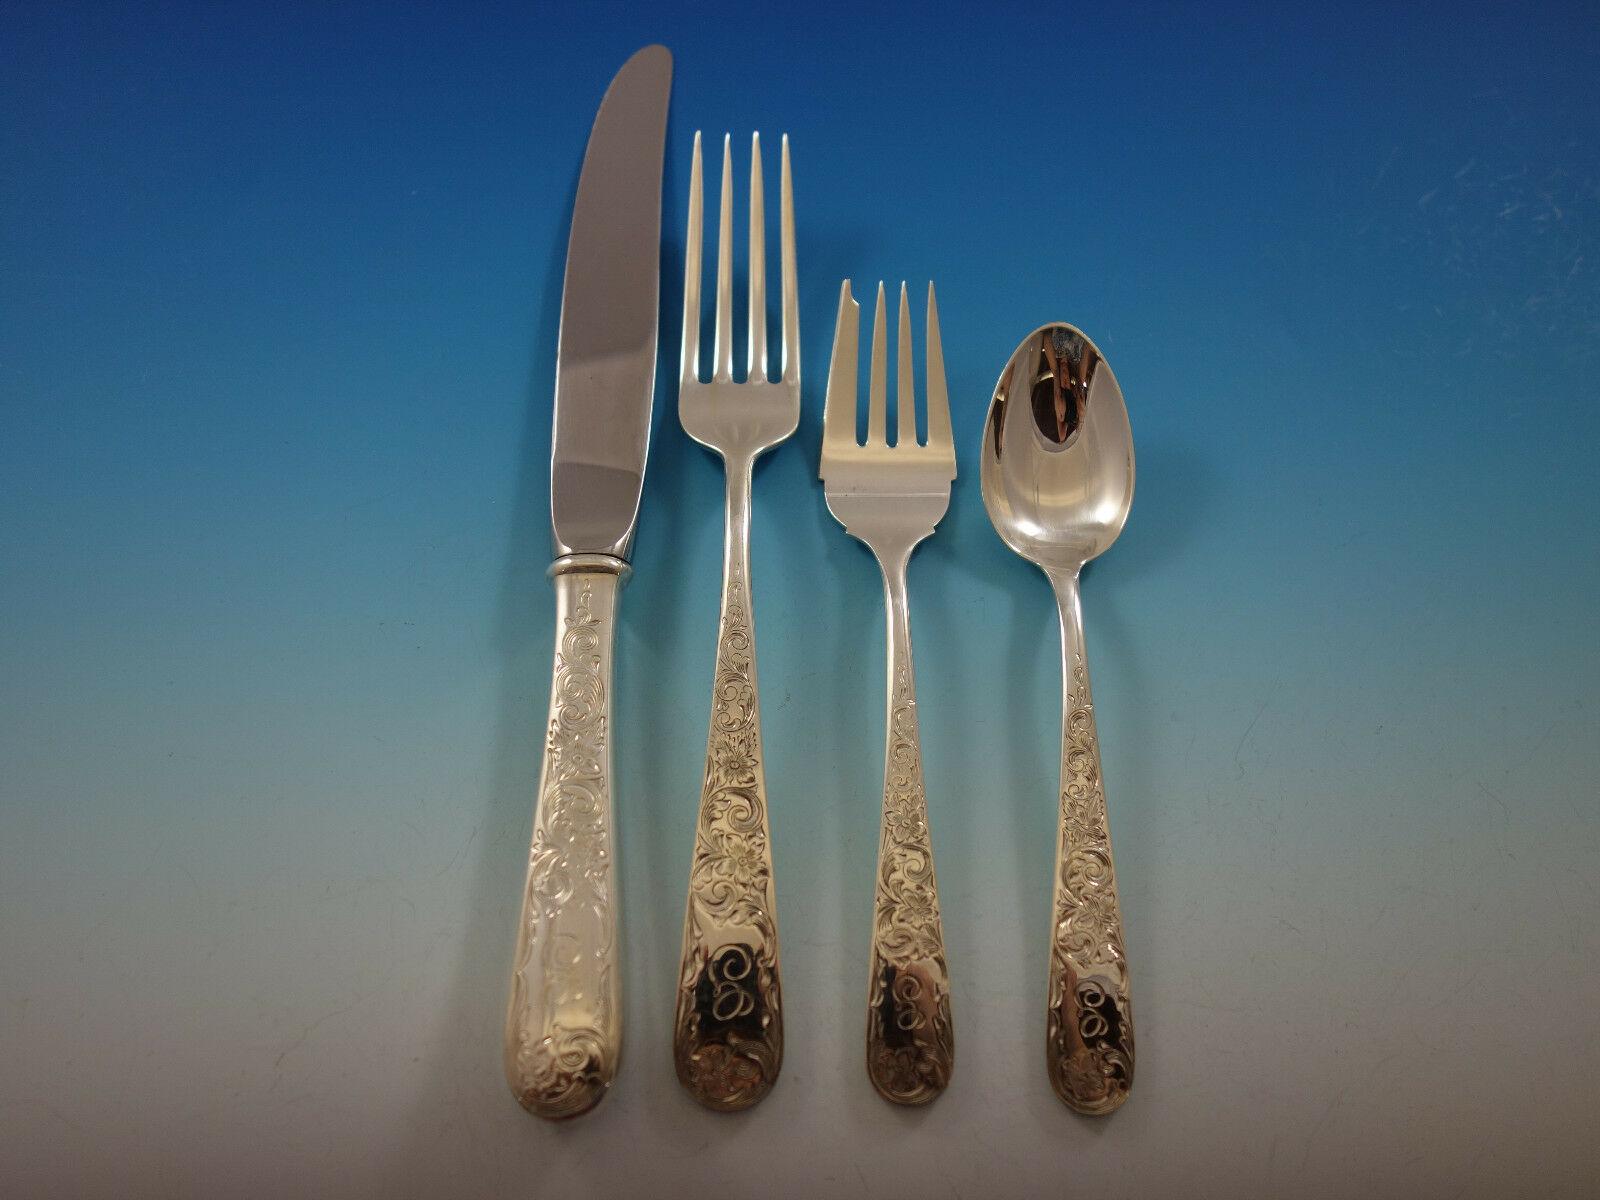 Dinner size Old Maryland Engraved by Kirk sterling silver flatware set, 62 pieces. This set includes:

8 dinner size knives, 9 5/8